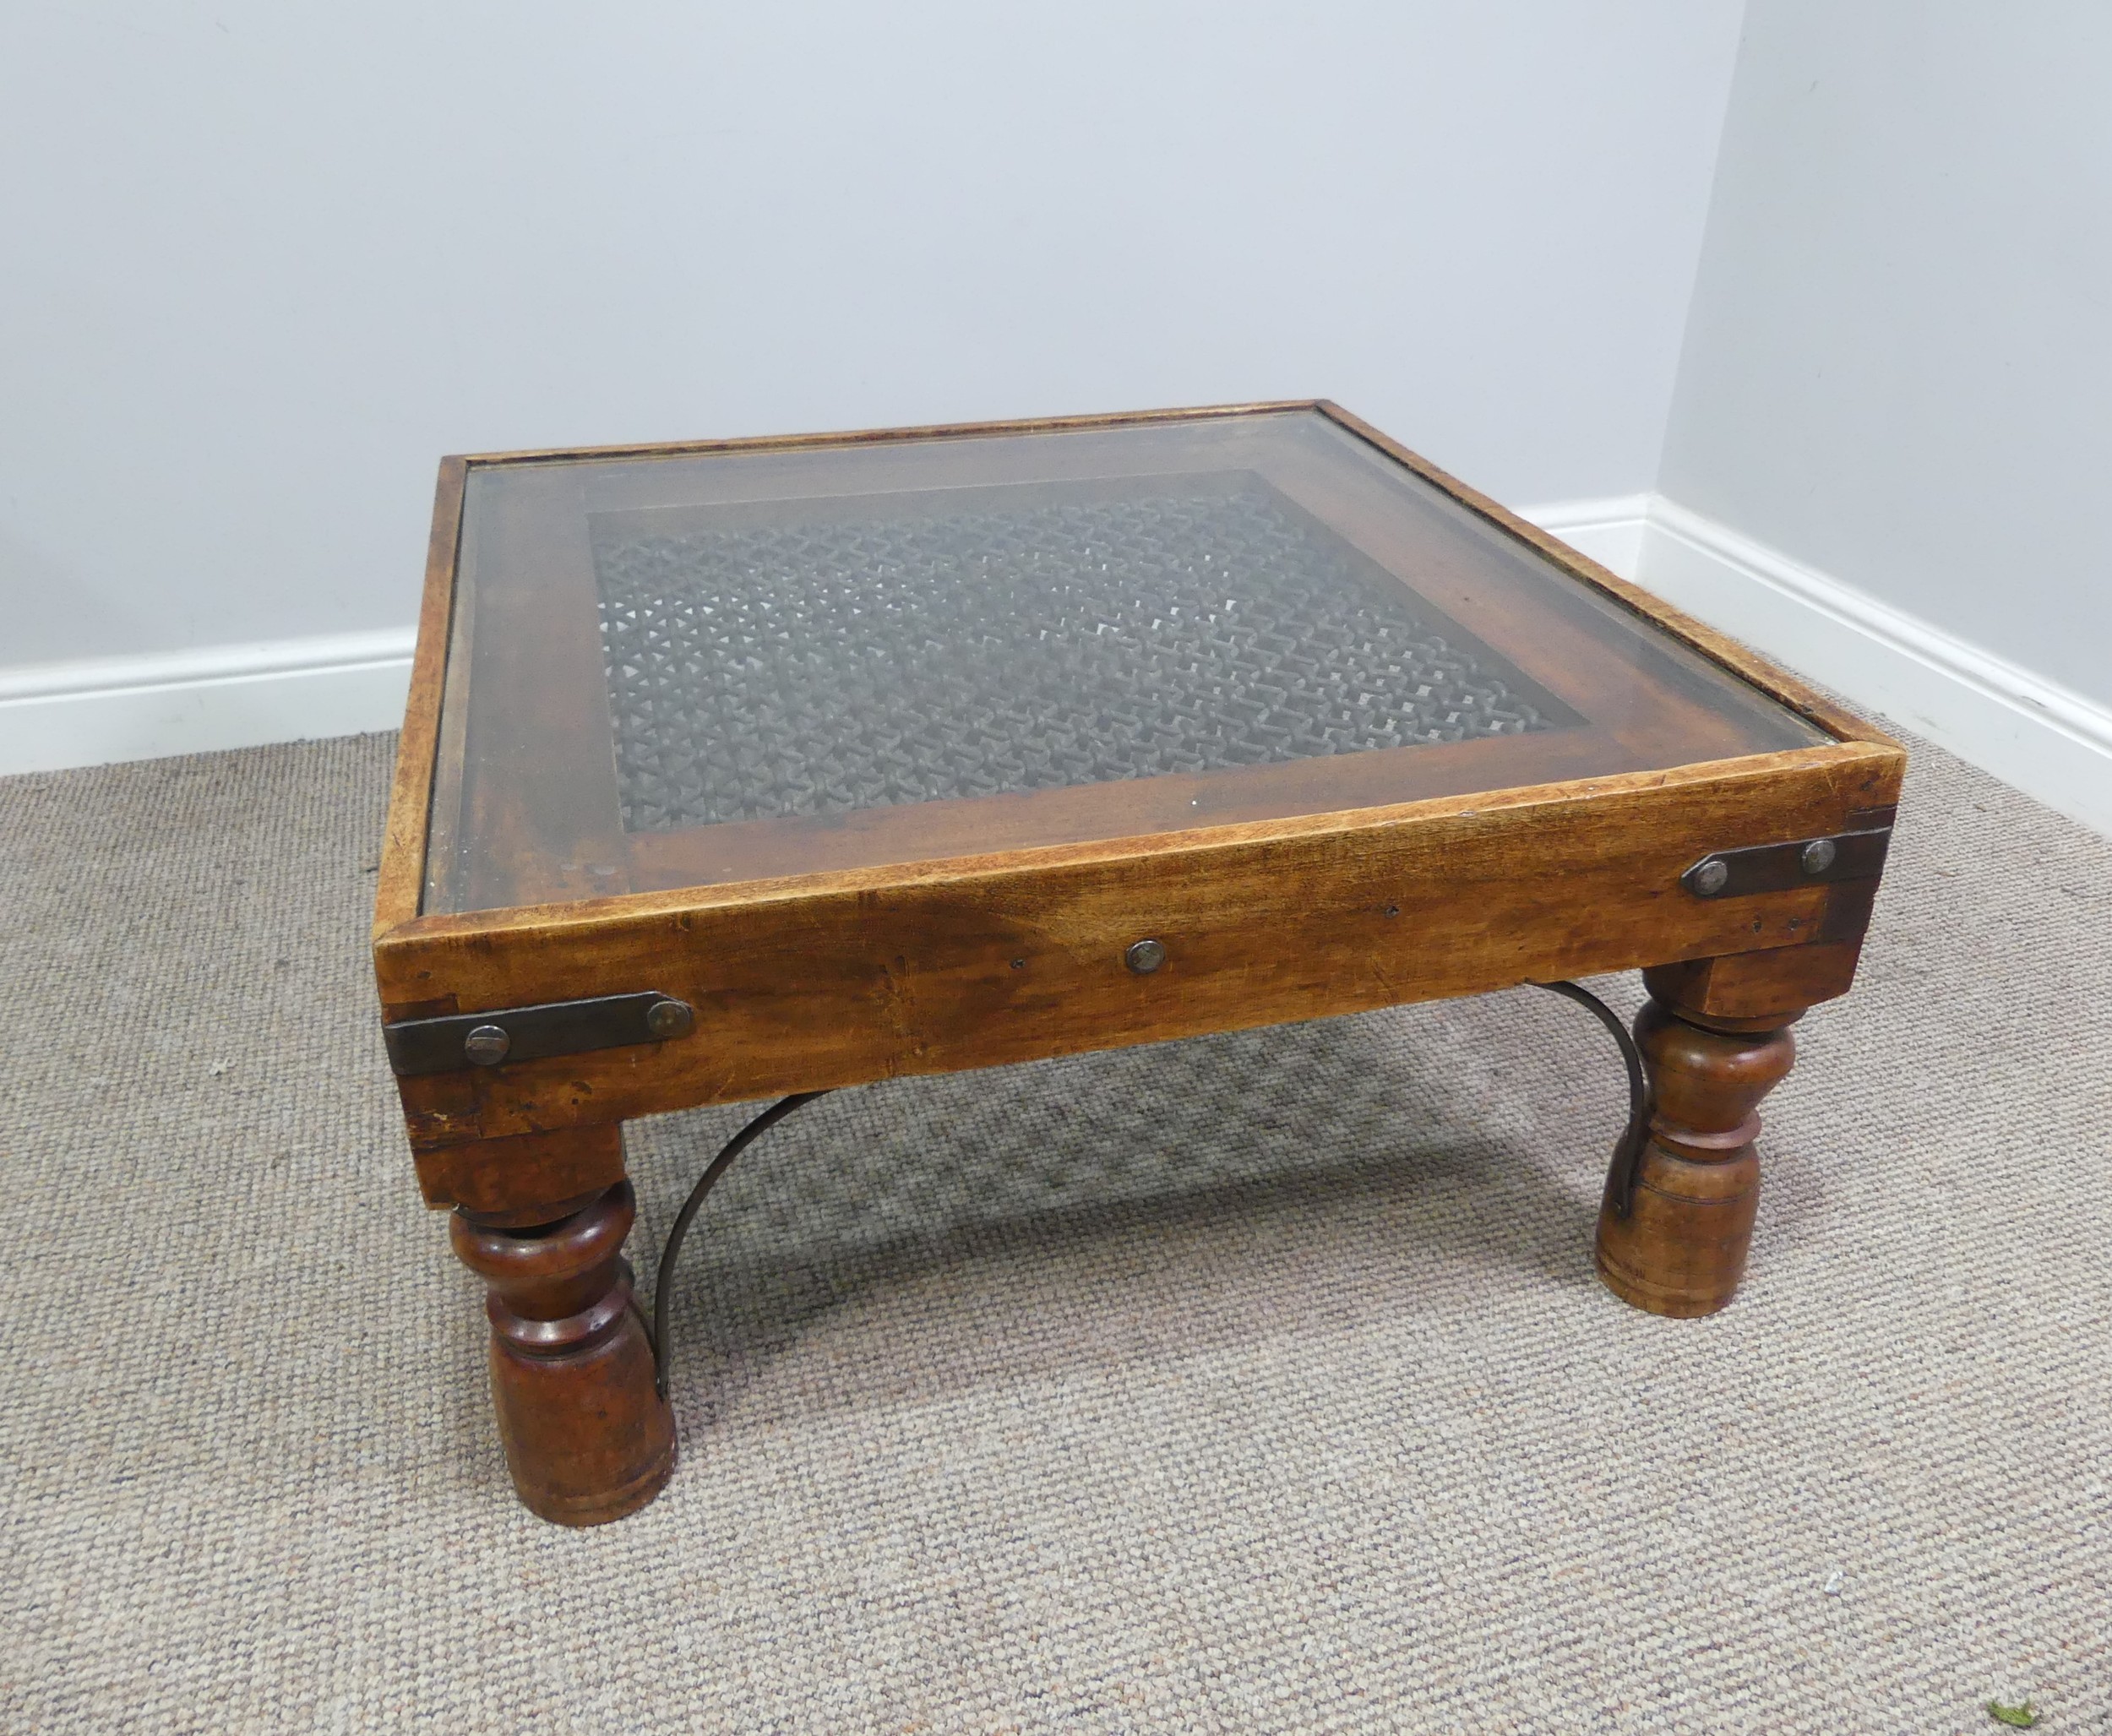 A 20th century rustic style oak and iron Coffee Table with glass top, W 80cm x D 80cm x H 40cm.